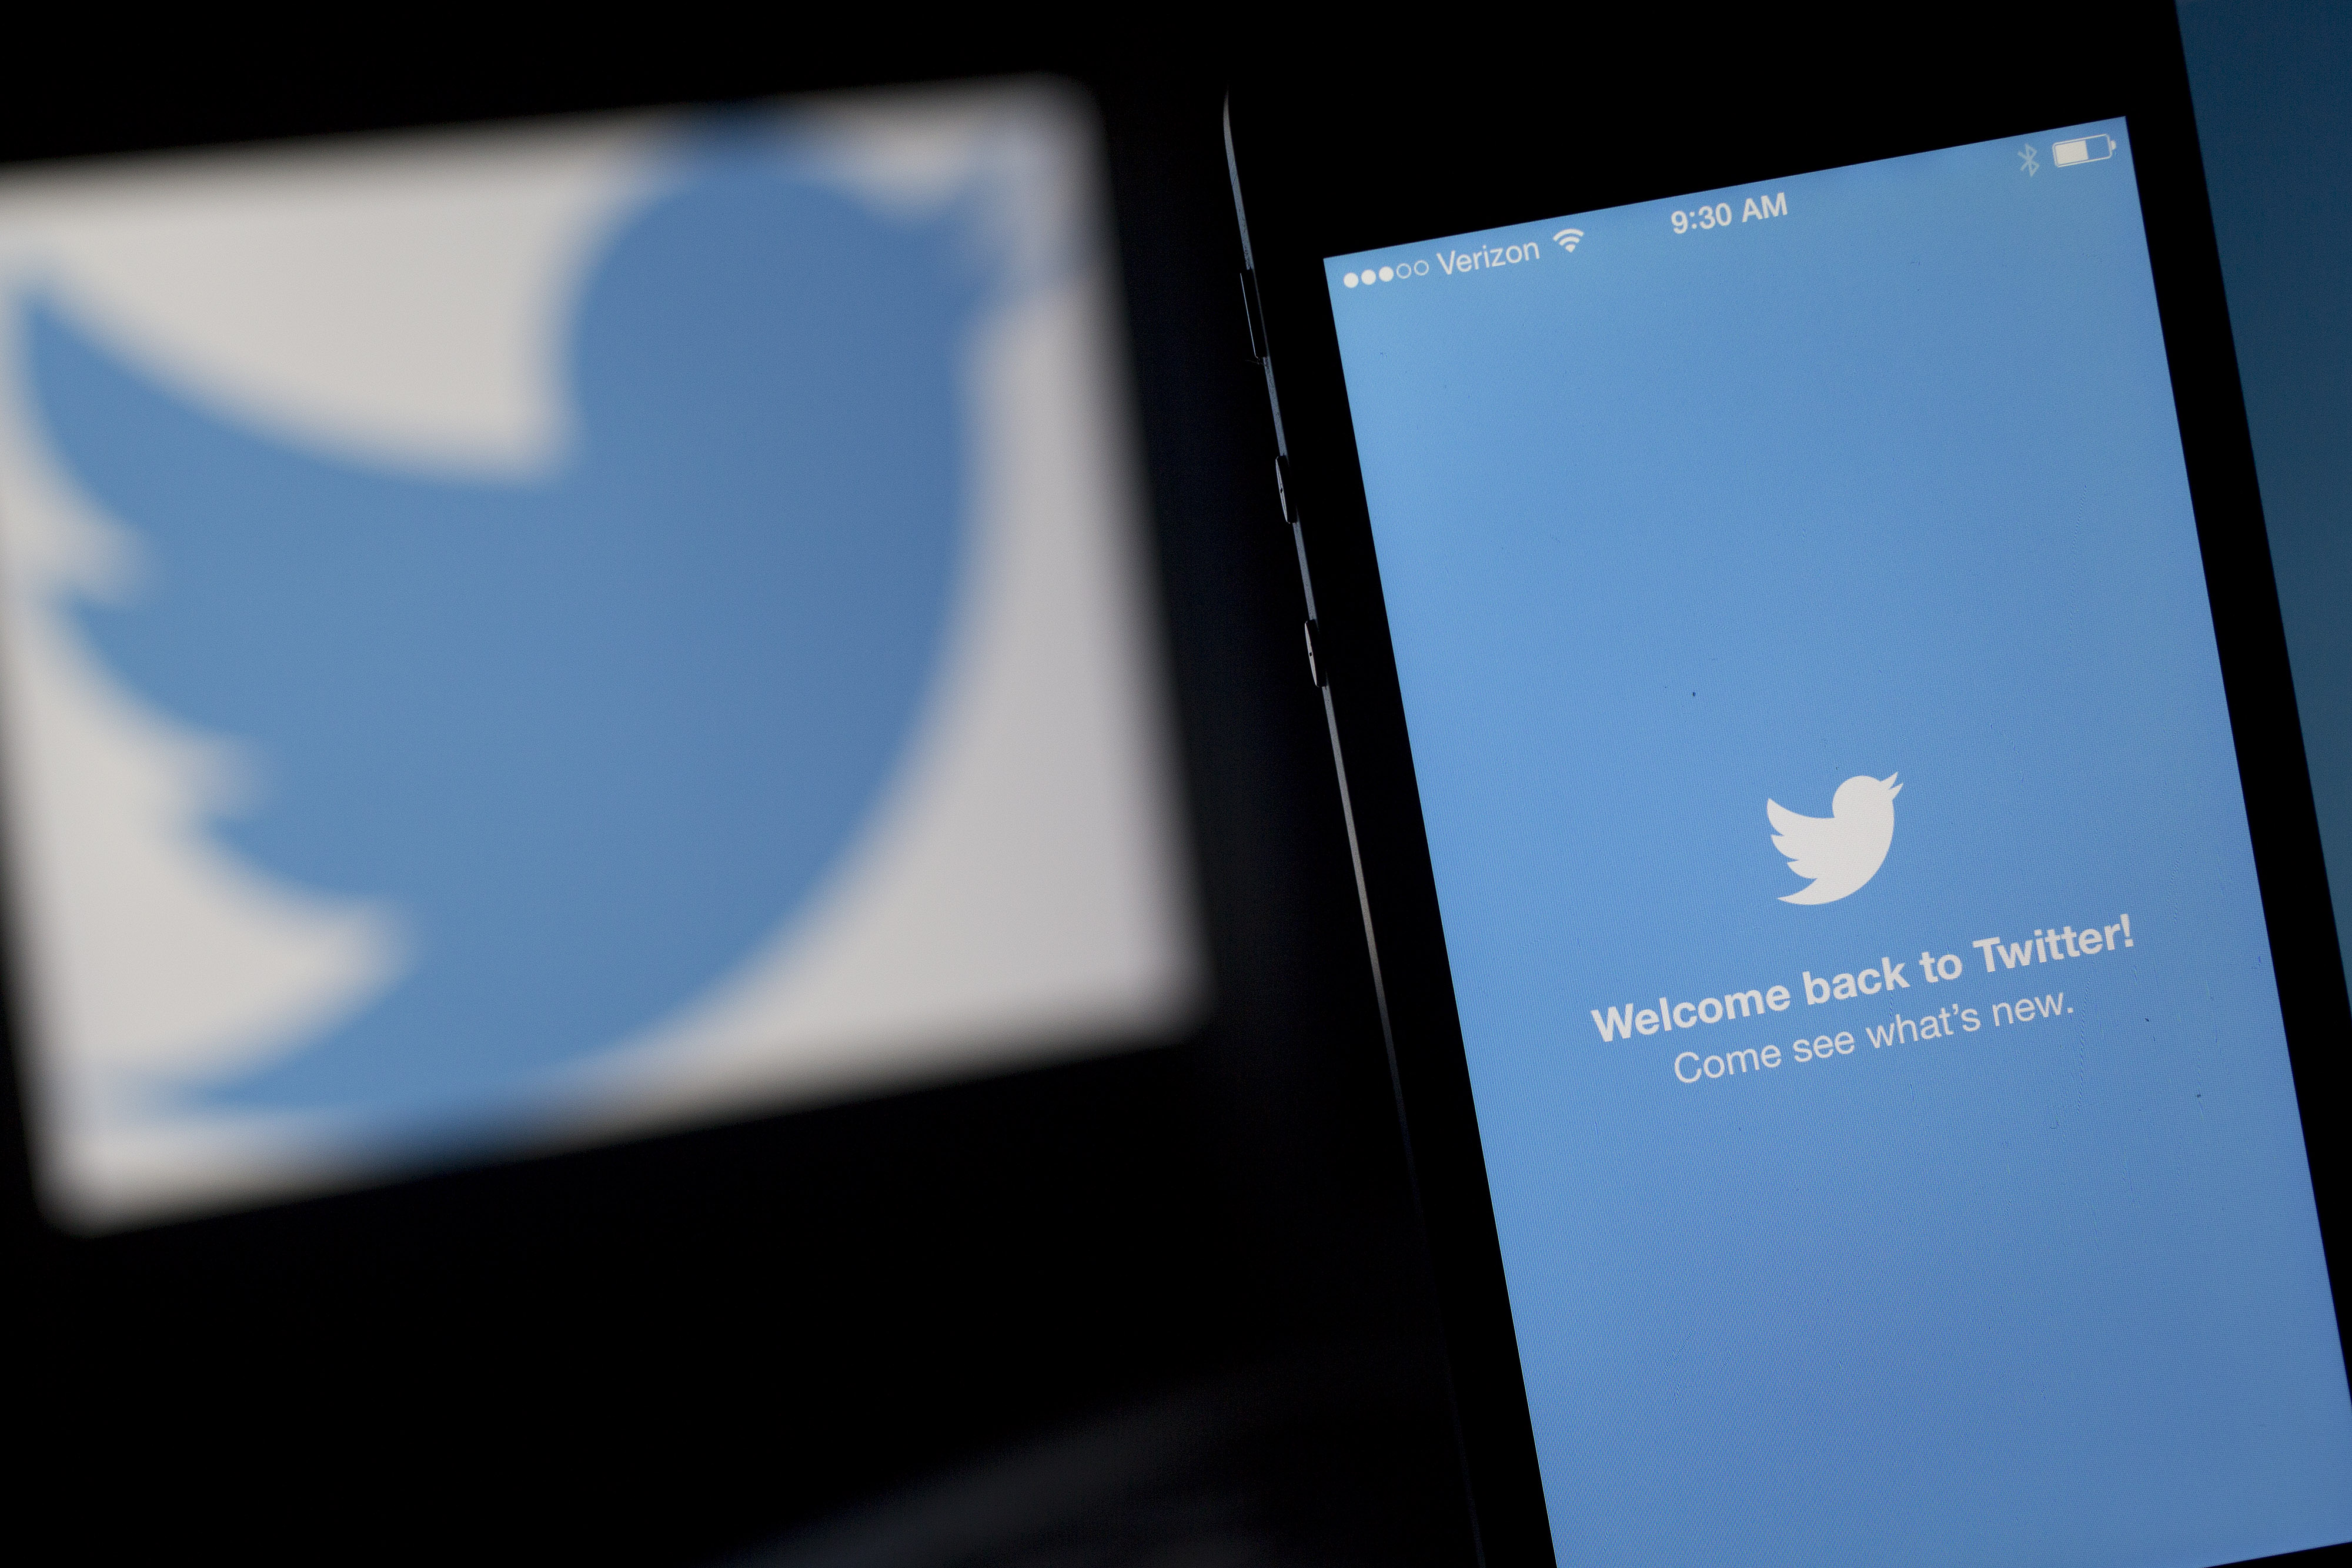 The Twitter Inc. application and logo are displayed on a laptop computer and Apple Inc. iPhone 5s in this arranged photograph in Washington, D.C., U.S., on Friday, April 25, 2014. (Bloomberg/Getty Images)